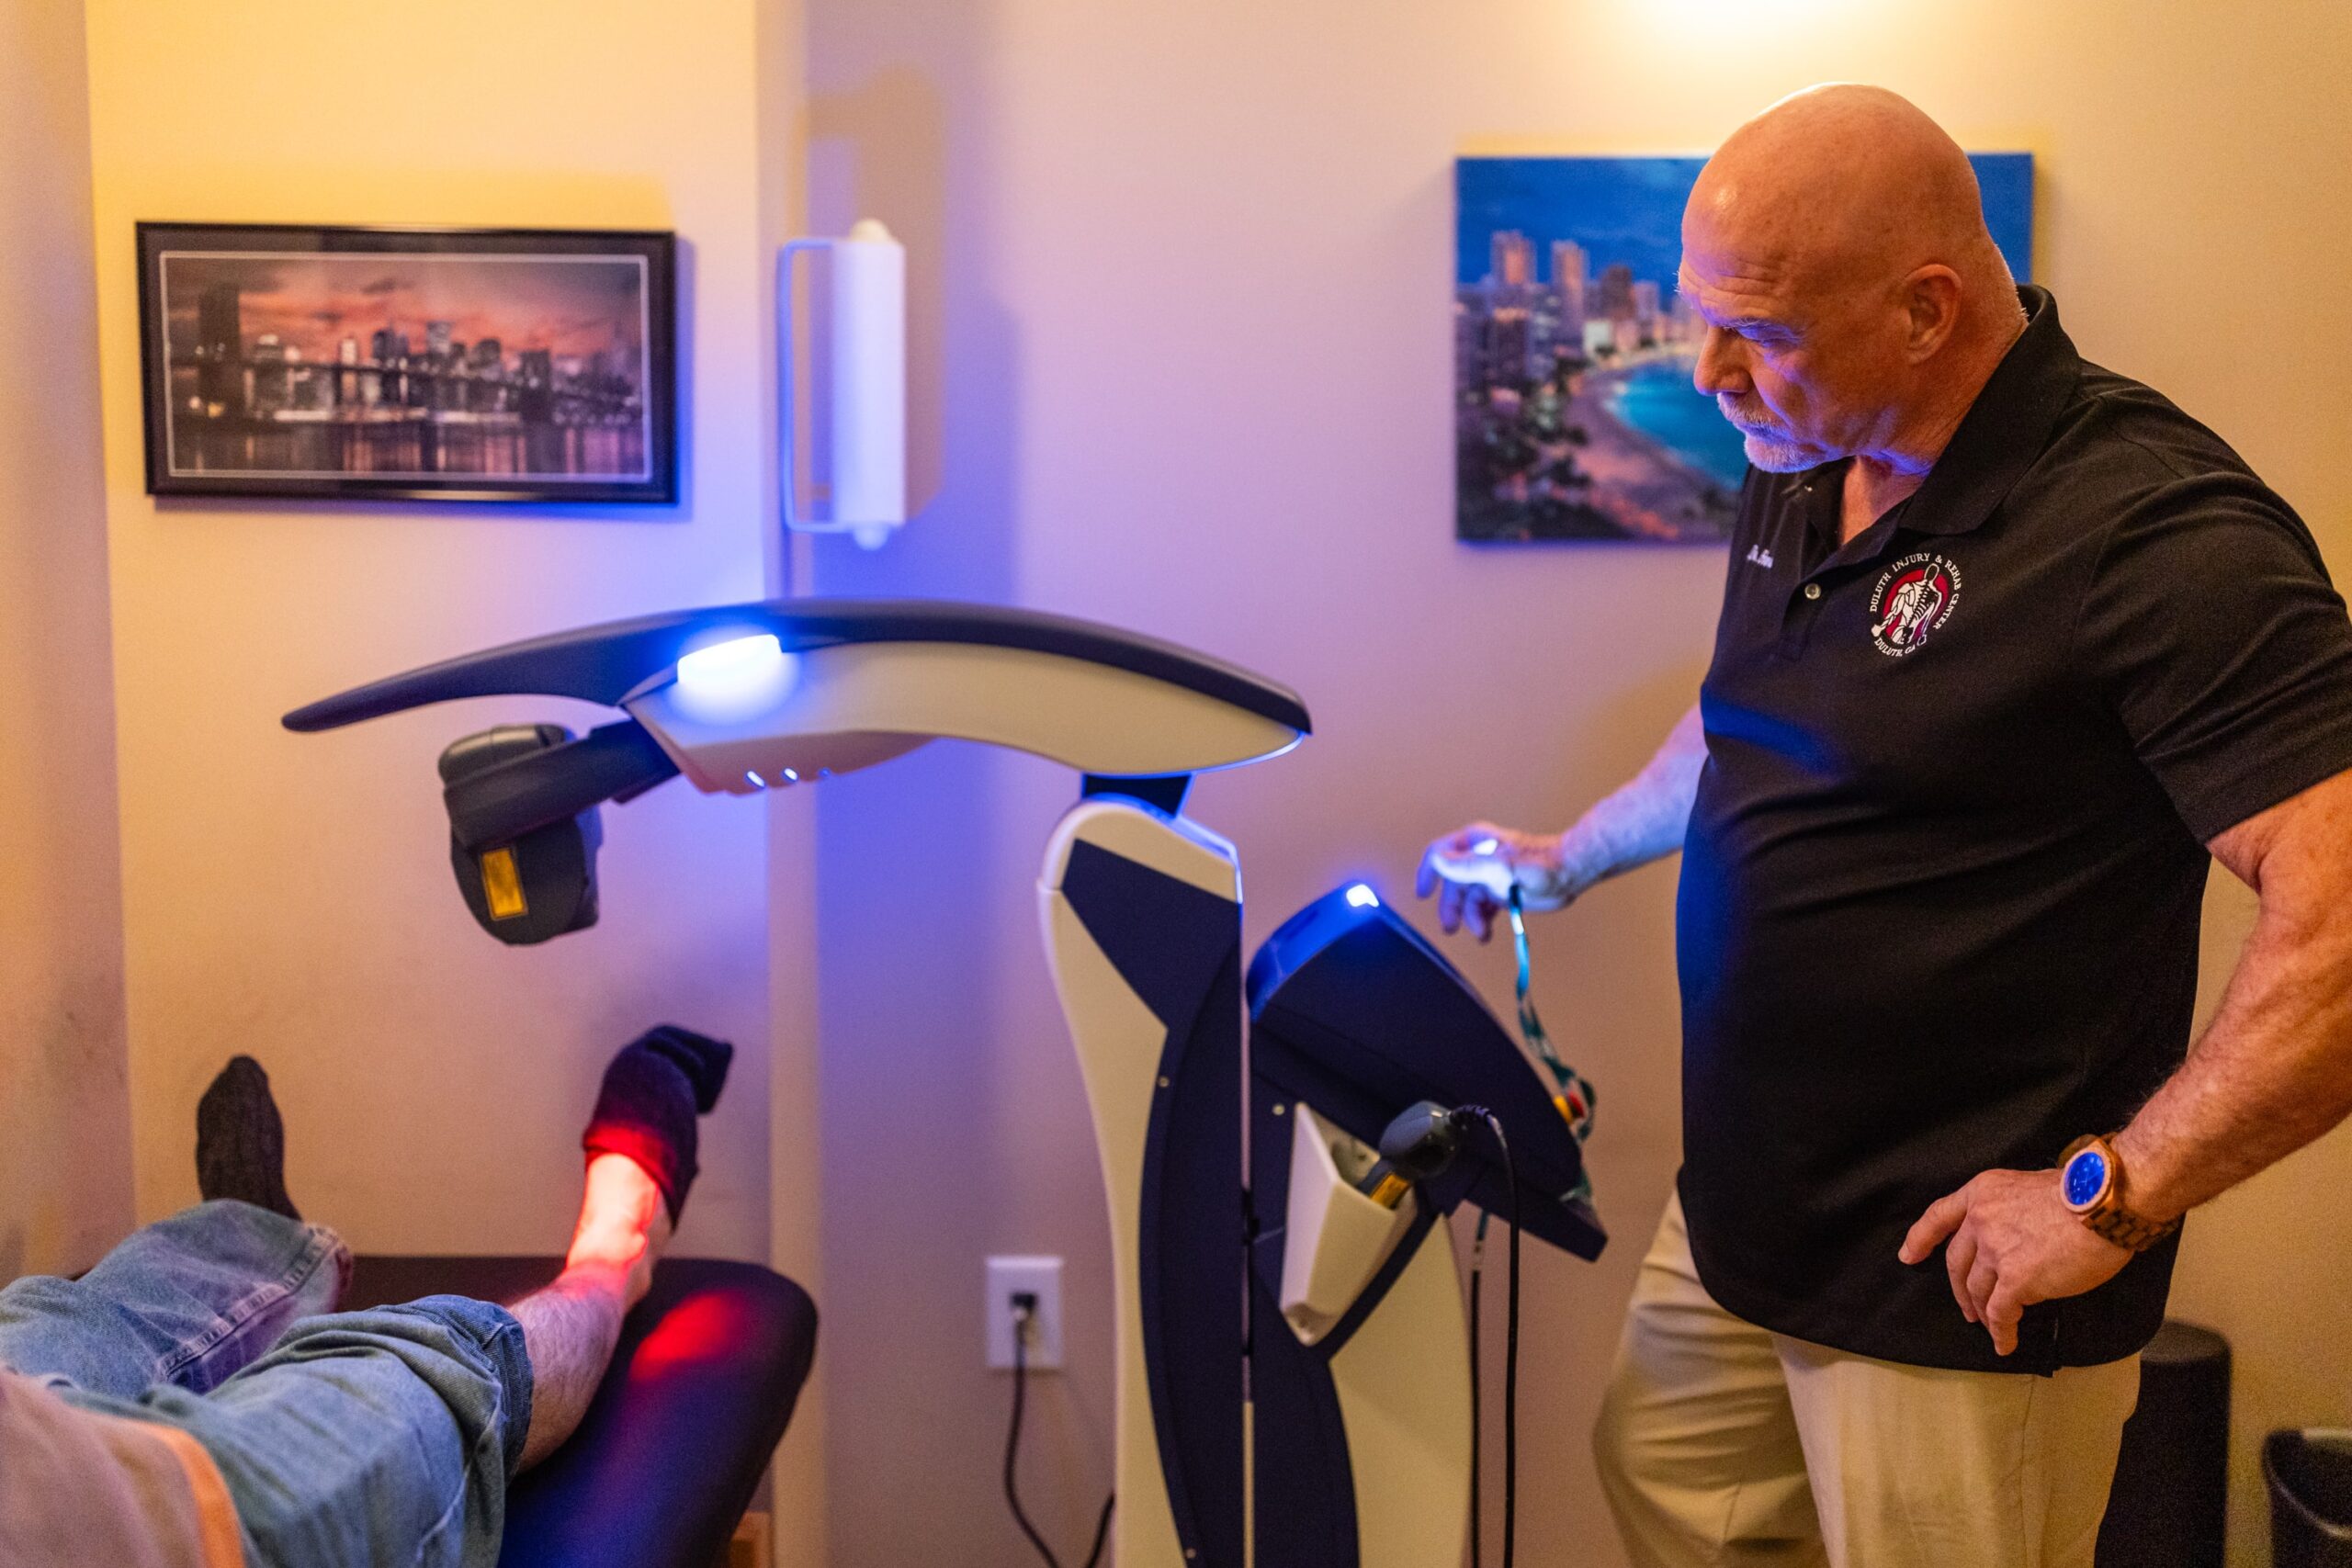 A man operates a therapeutic laser device on a patient's foot in a clinical setting.